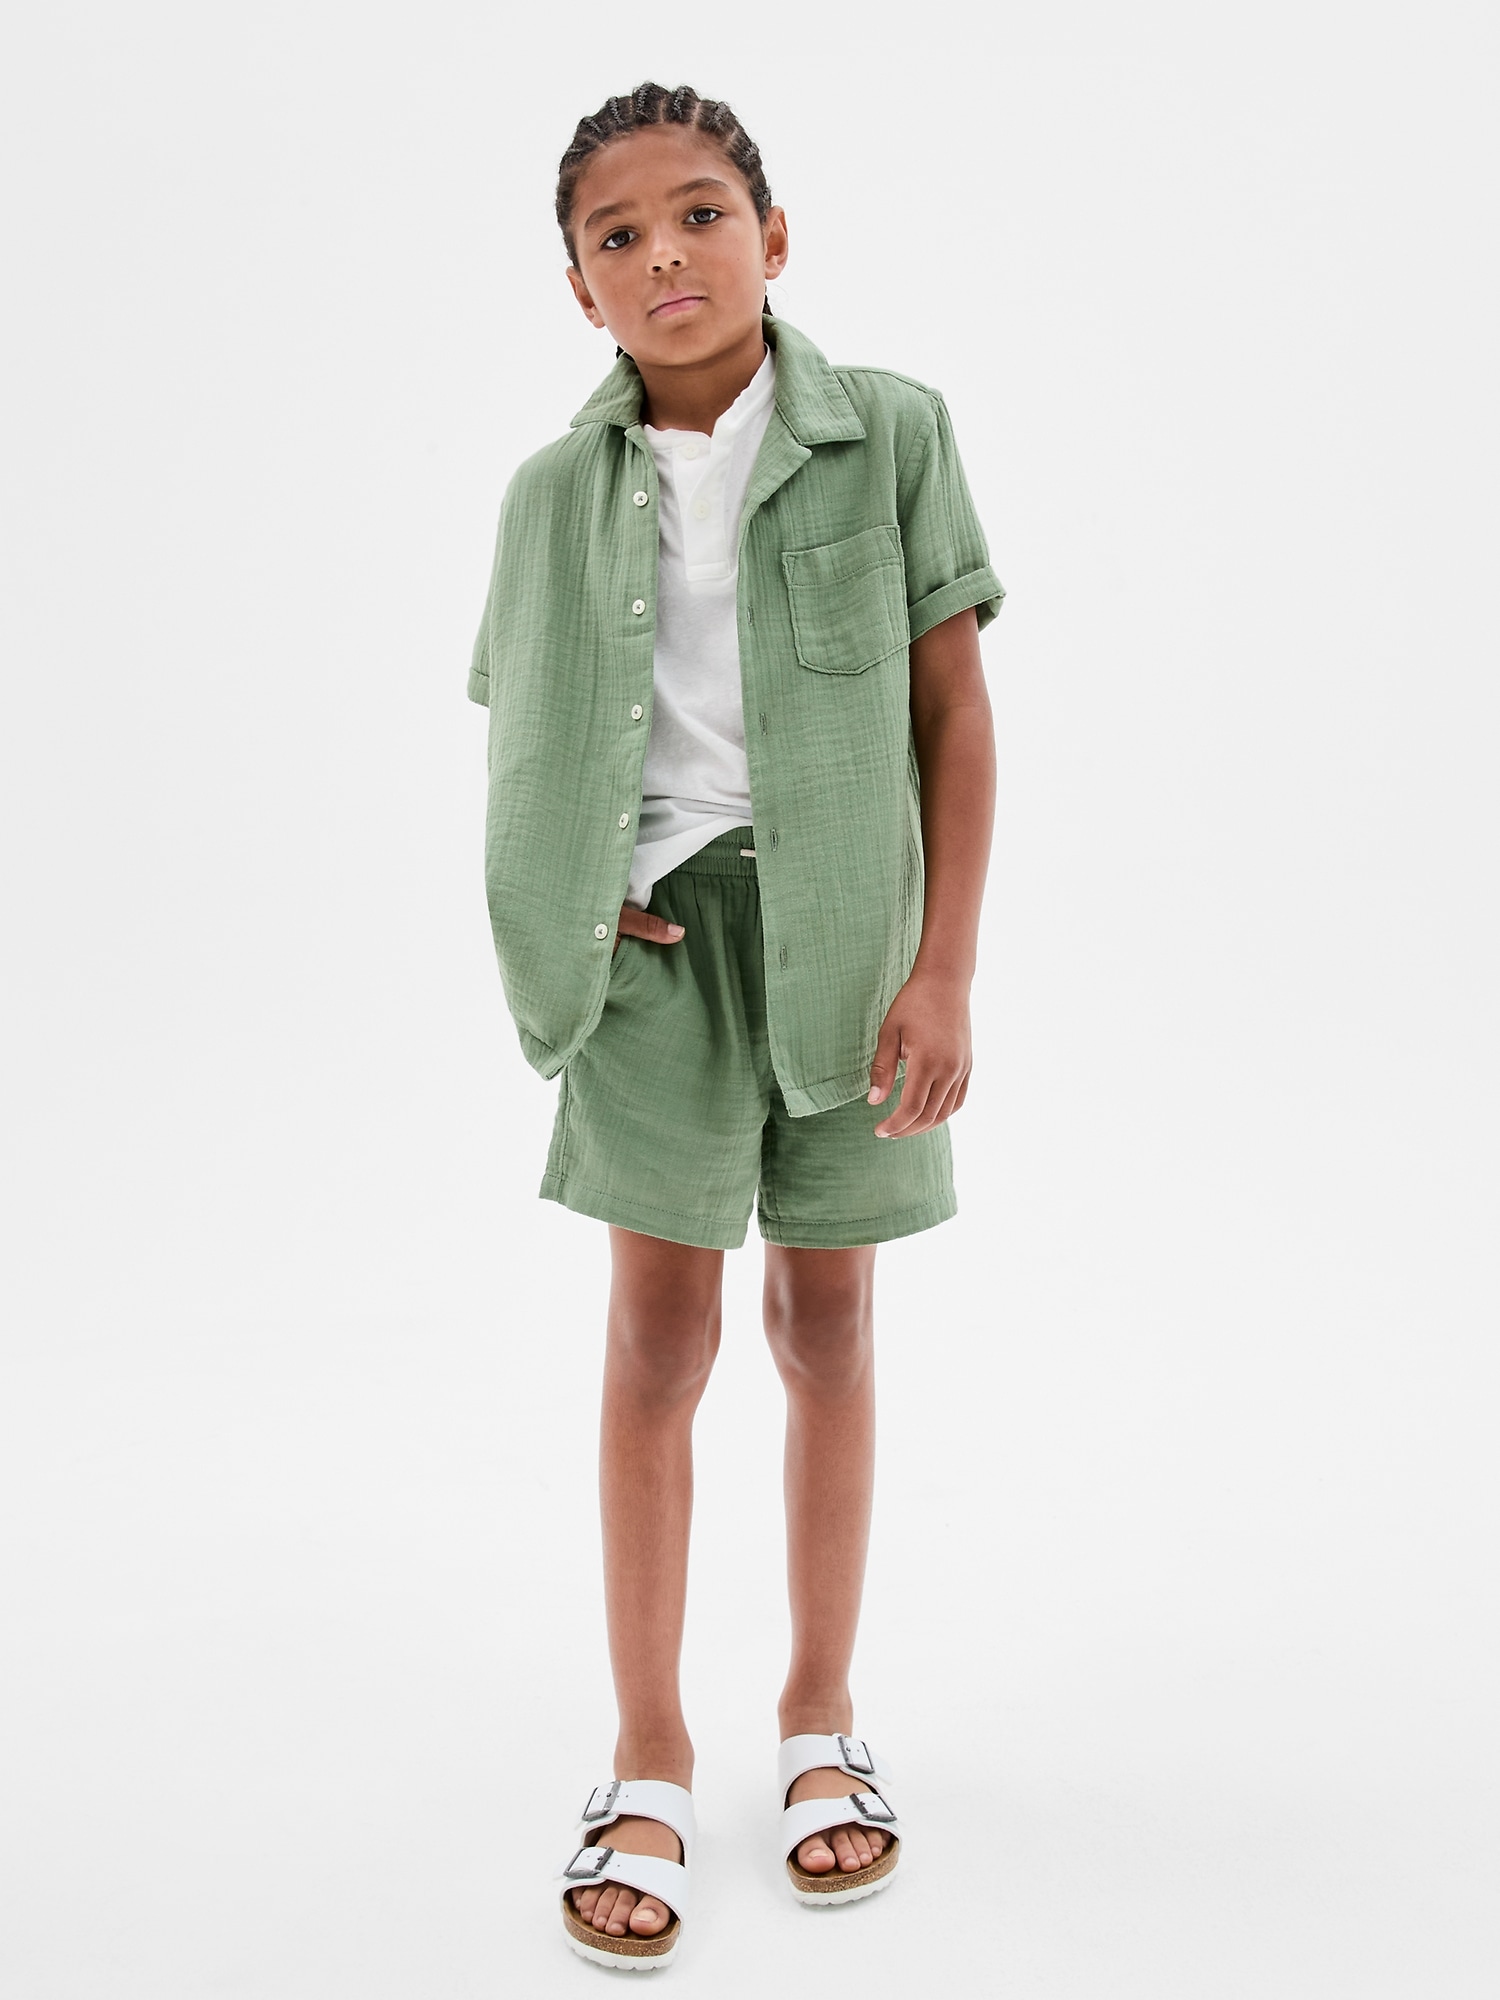 Kids Gauze Pull-On Shorts with Washwell | Gap Factory